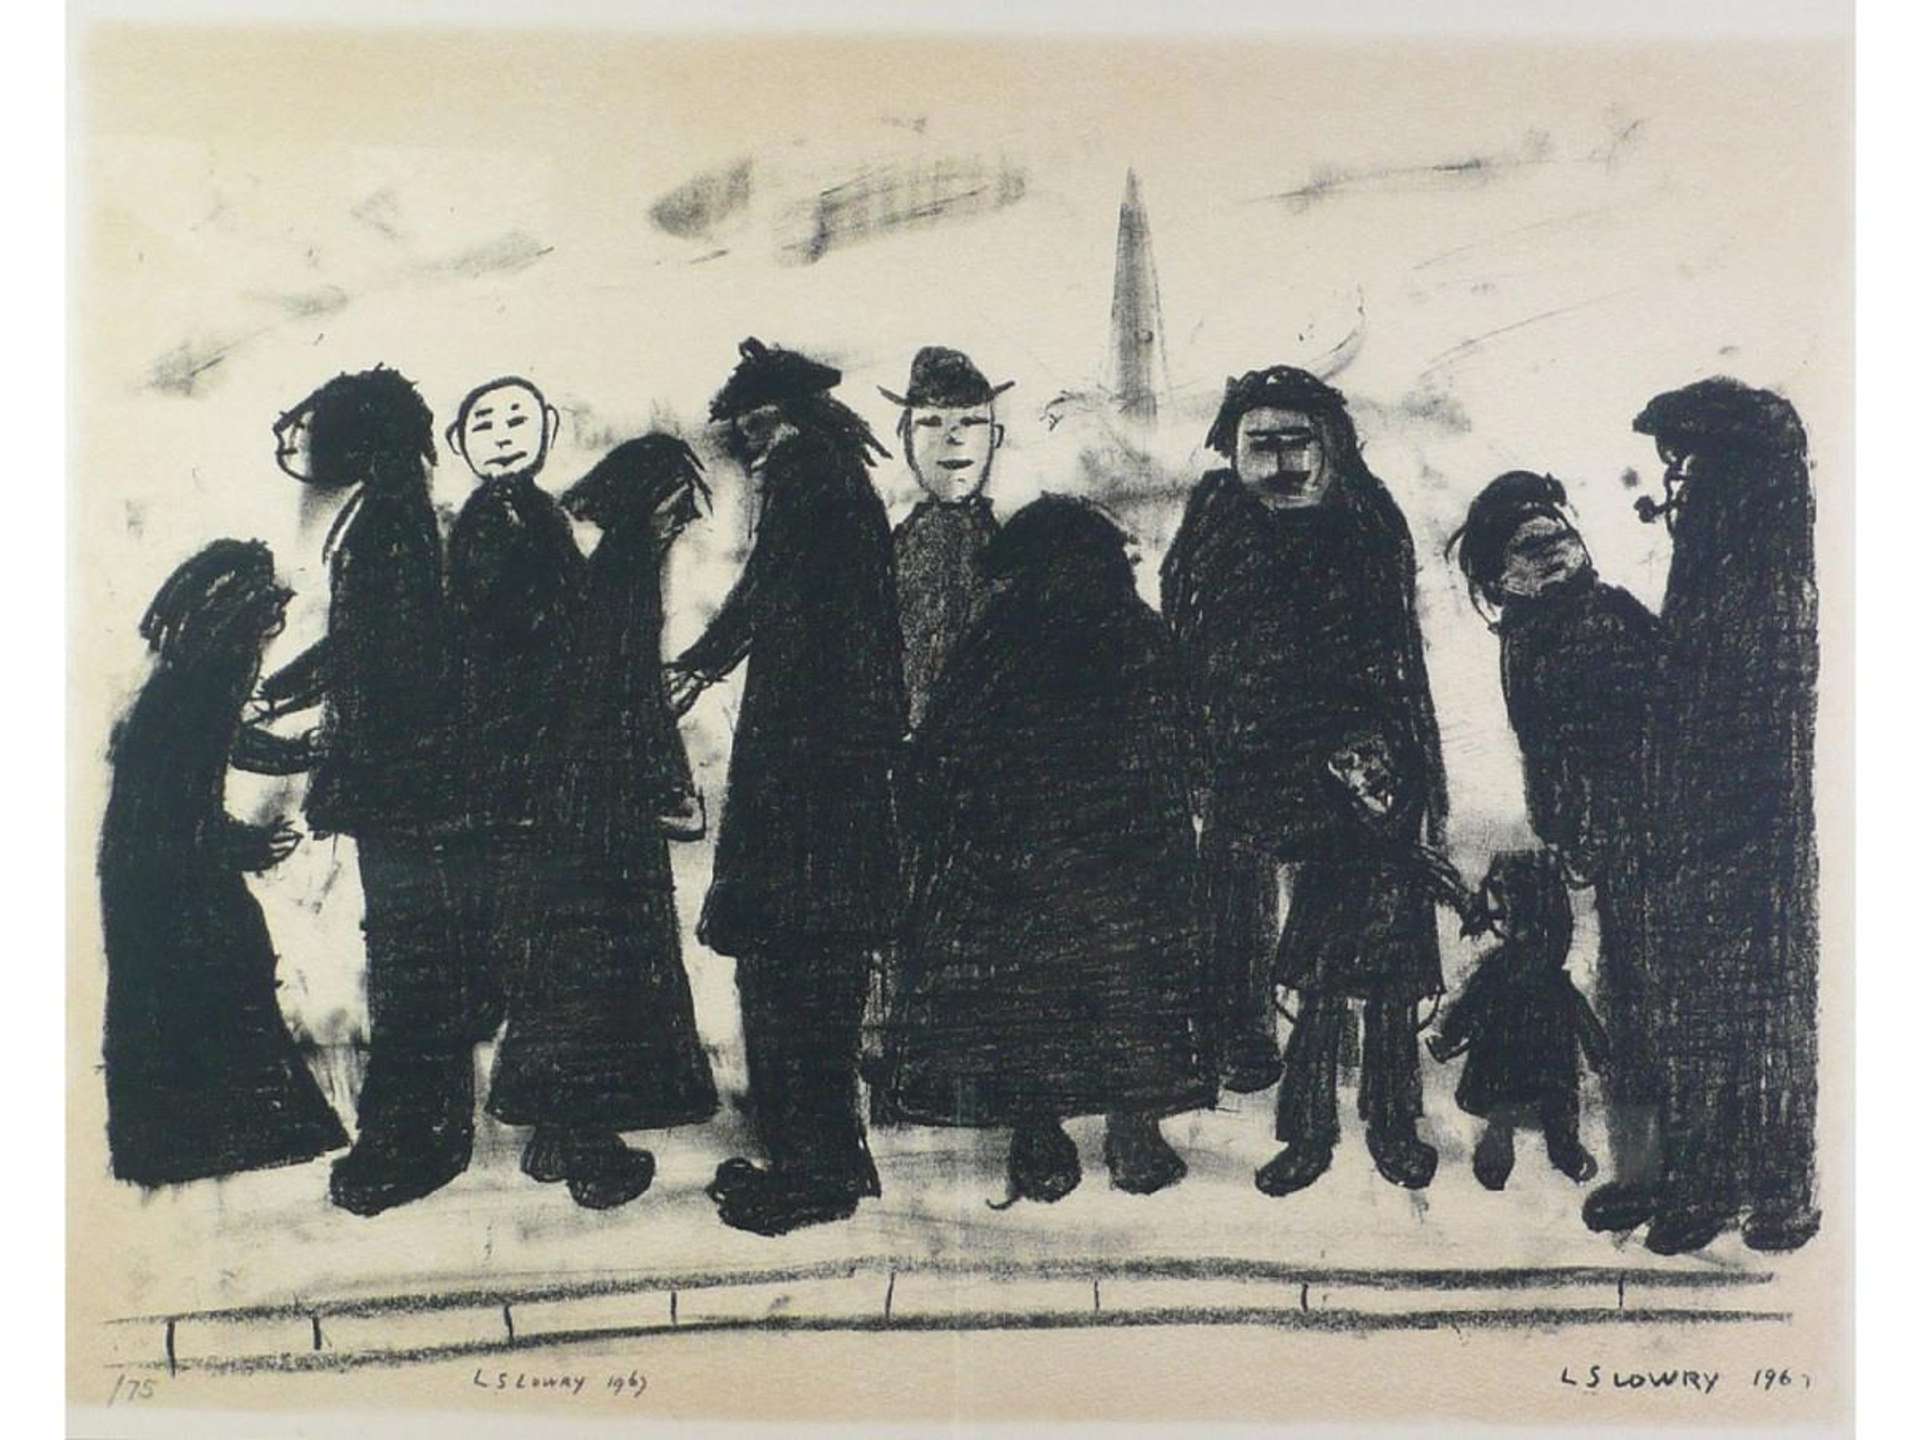 Shapes And Sizes - Signed Print by L. S. Lowry 1967 - MyArtBroker